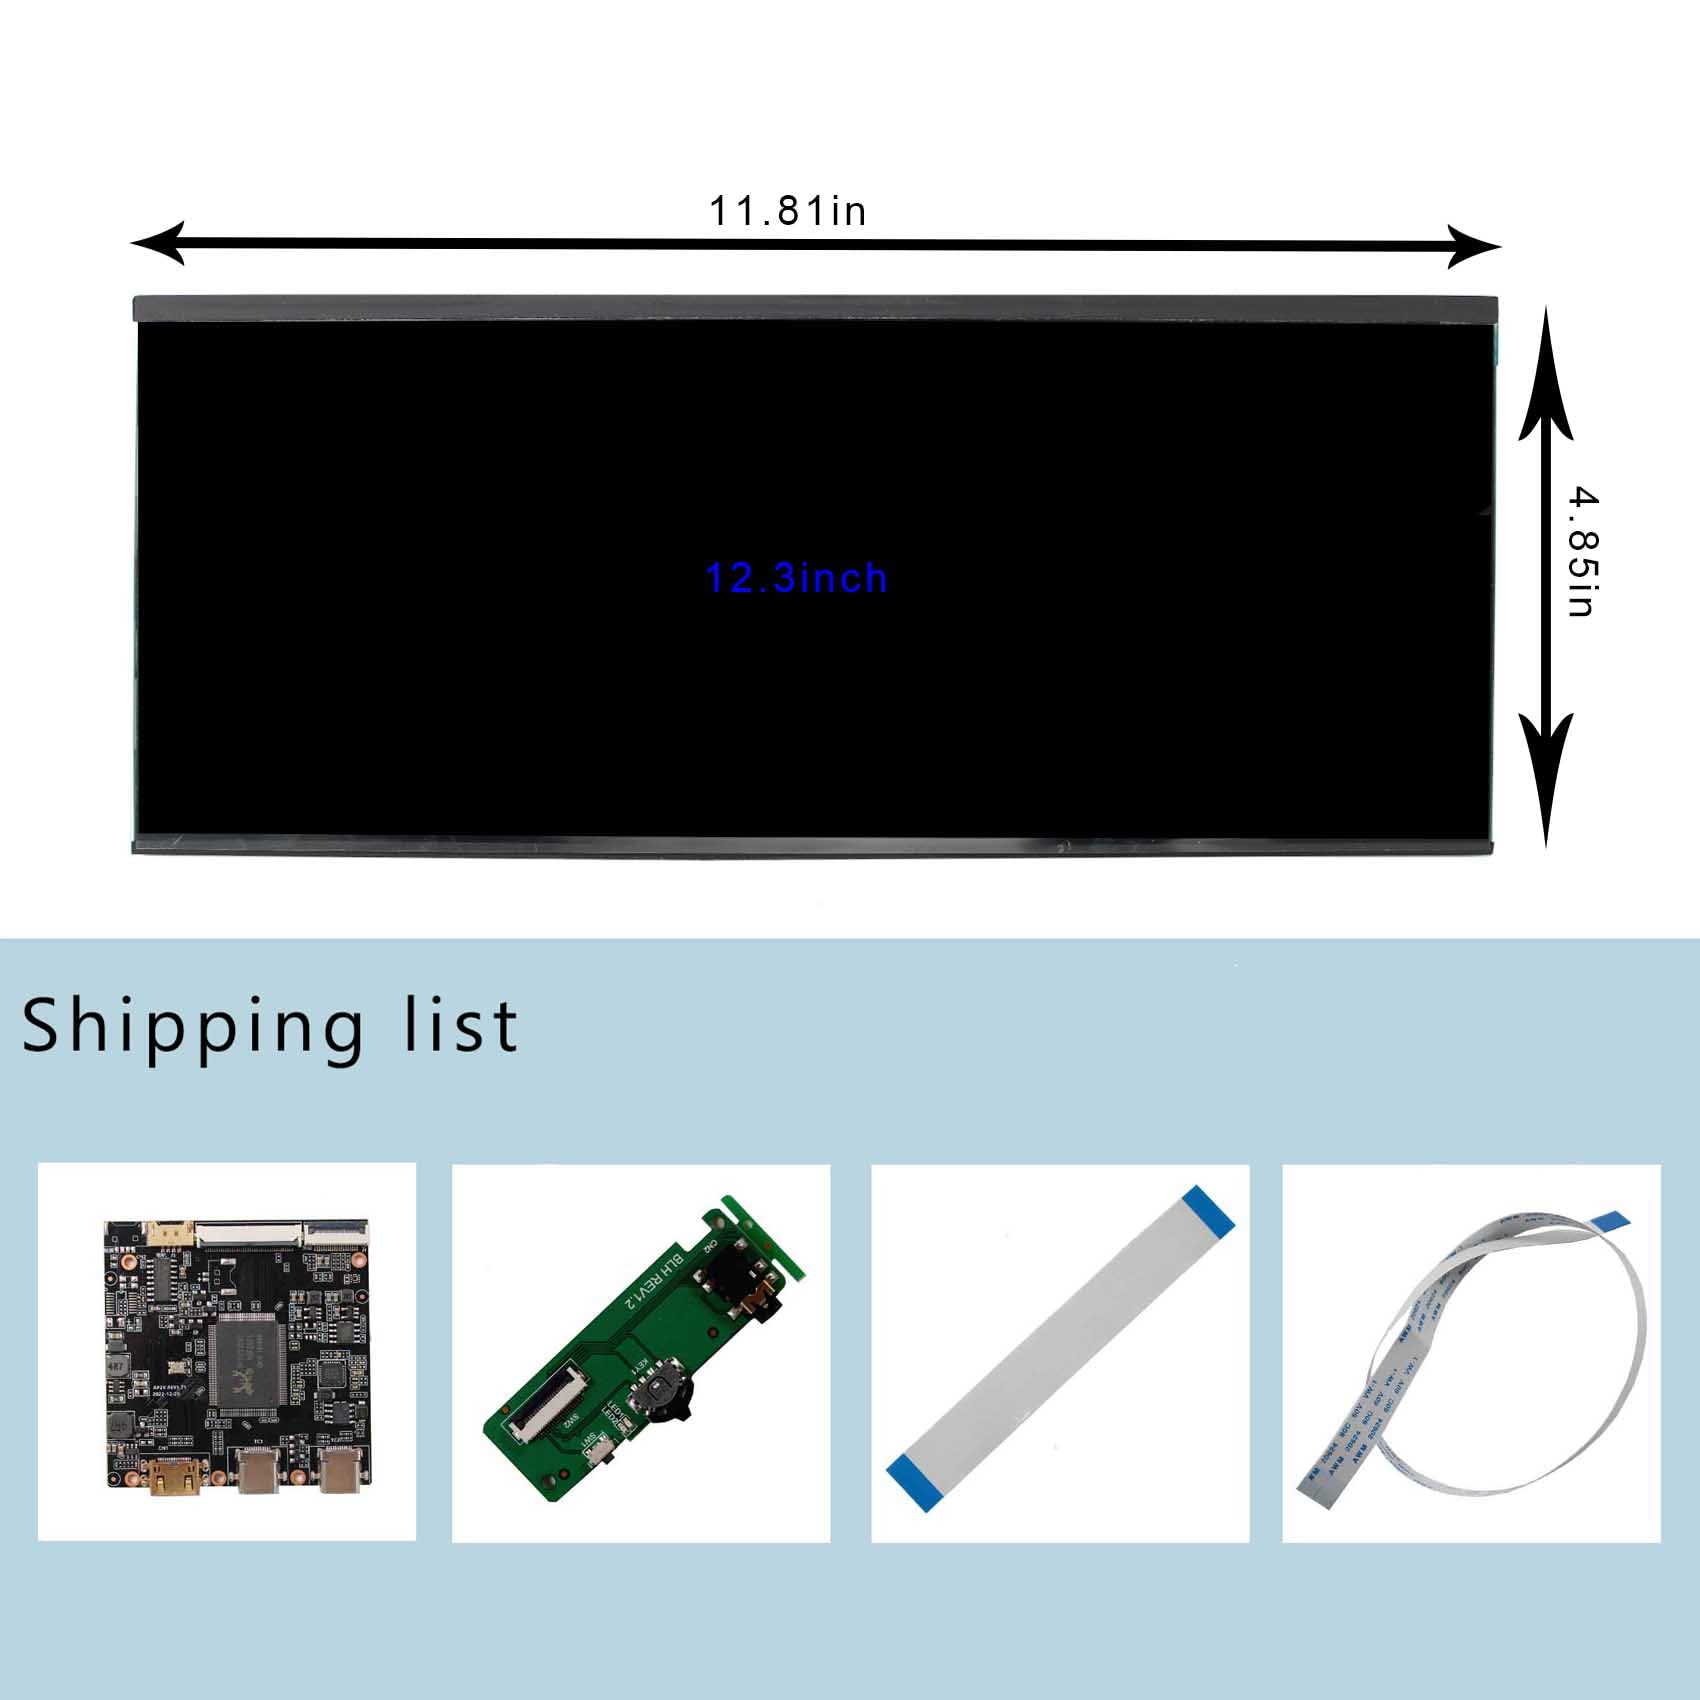 VSDISPLAY 12.3 Inch 2K LCD Screen 2400x900 with Type-c Mini HD-MI LCD Controller Board,as Extra Secondary Display Panel for PC/Laptop/Game Cabinet Monitor